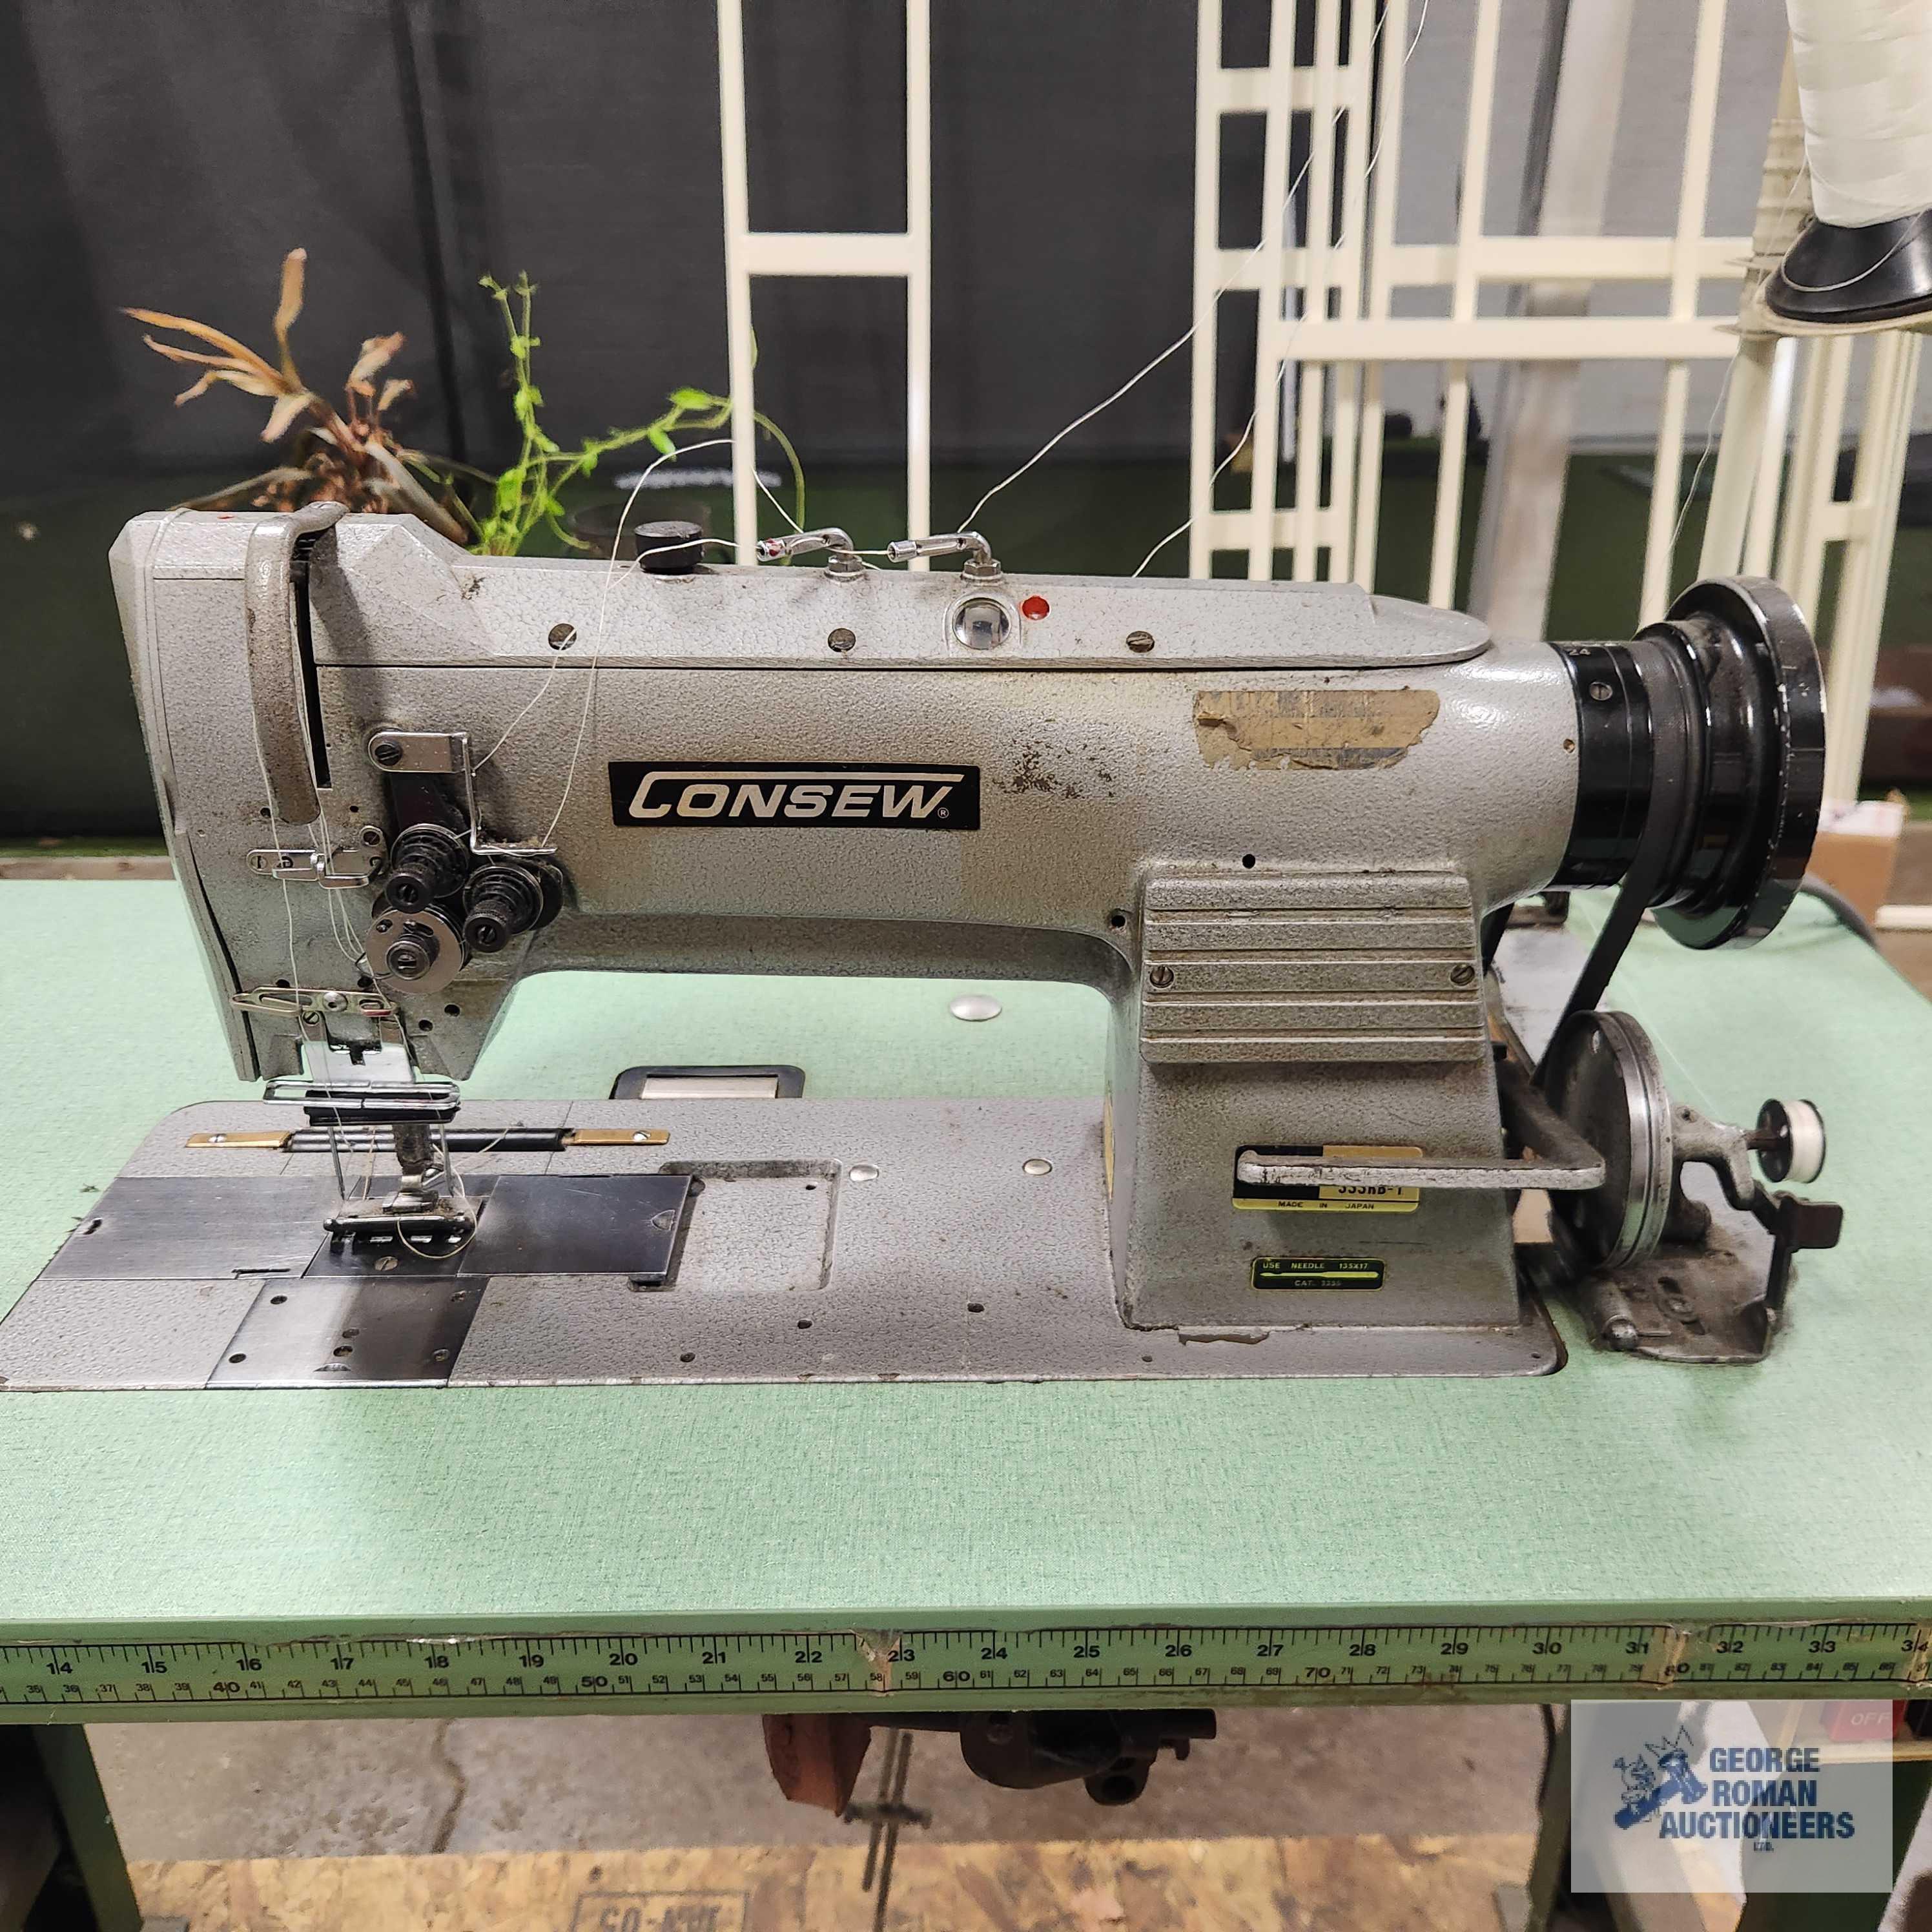 Consew model number 333RB-1 commercial sewing machine with fold out platform